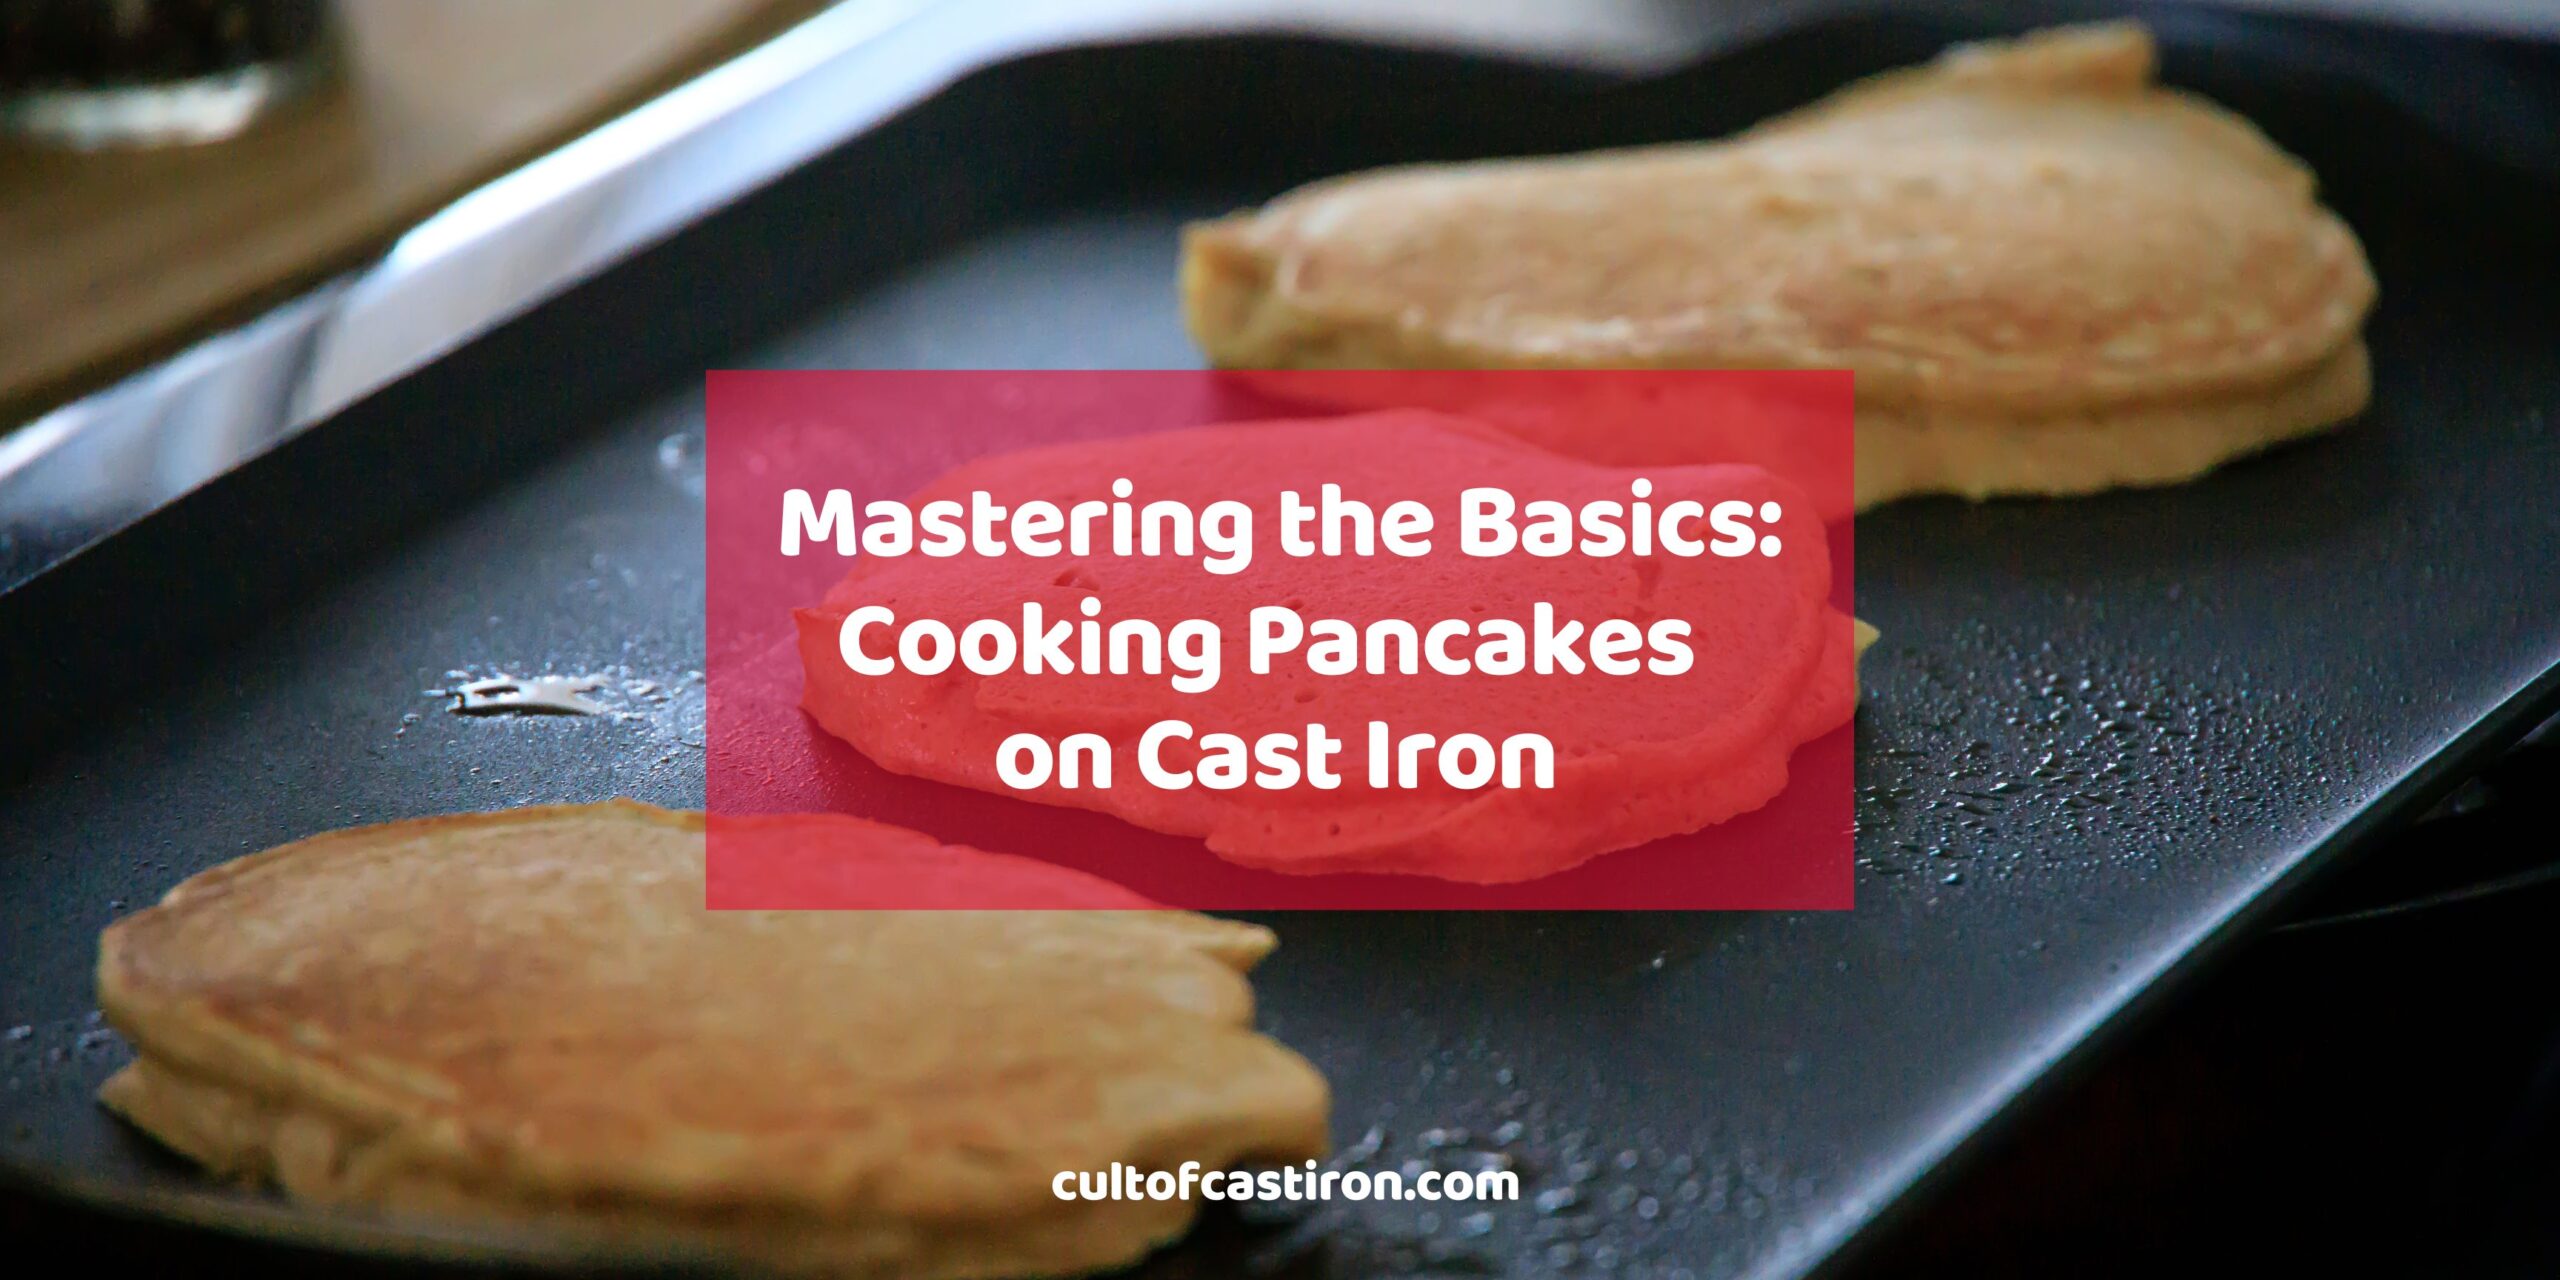 https://cultofcastiron.com/wp-content/uploads/2023/10/how-to-cook-pancakes-on-cast-iron-scaled.jpg